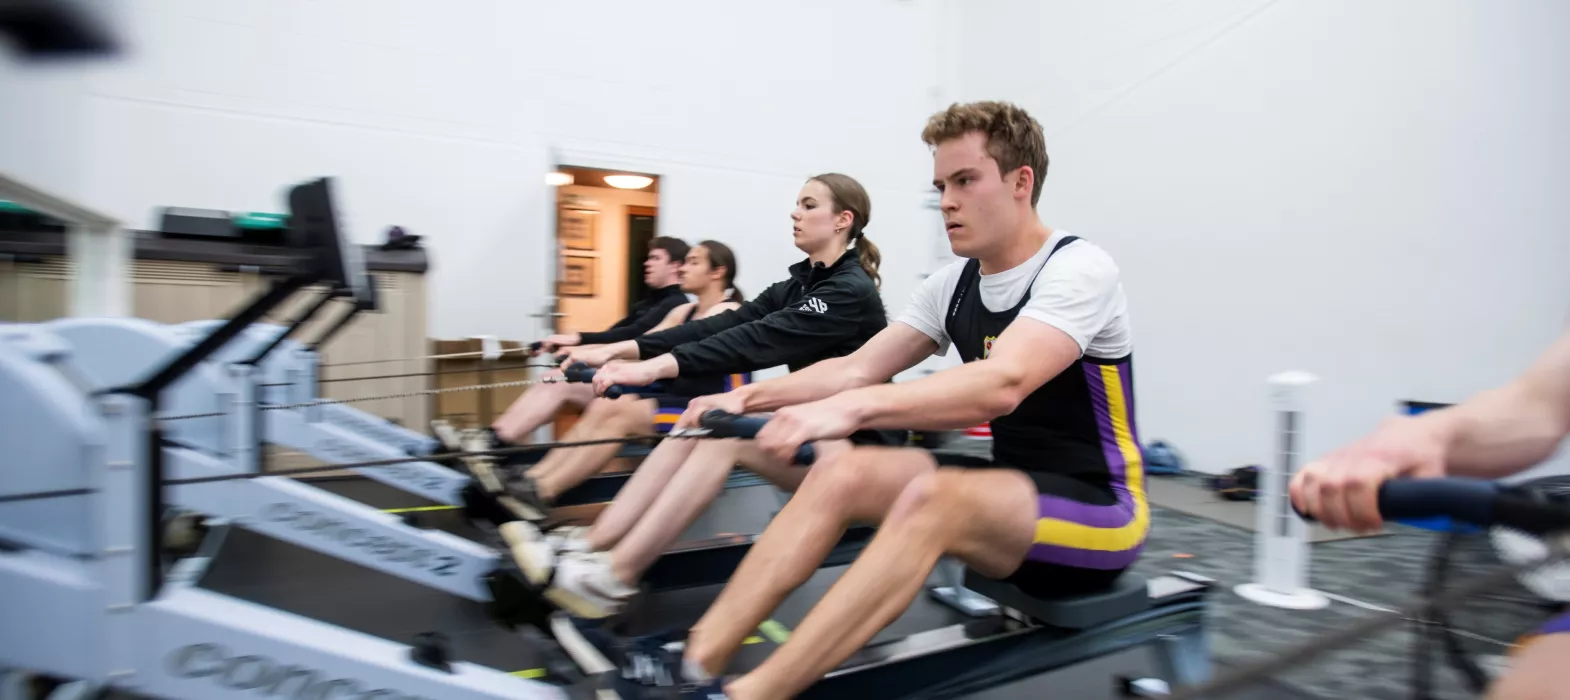 The rowing squad train in the erg room